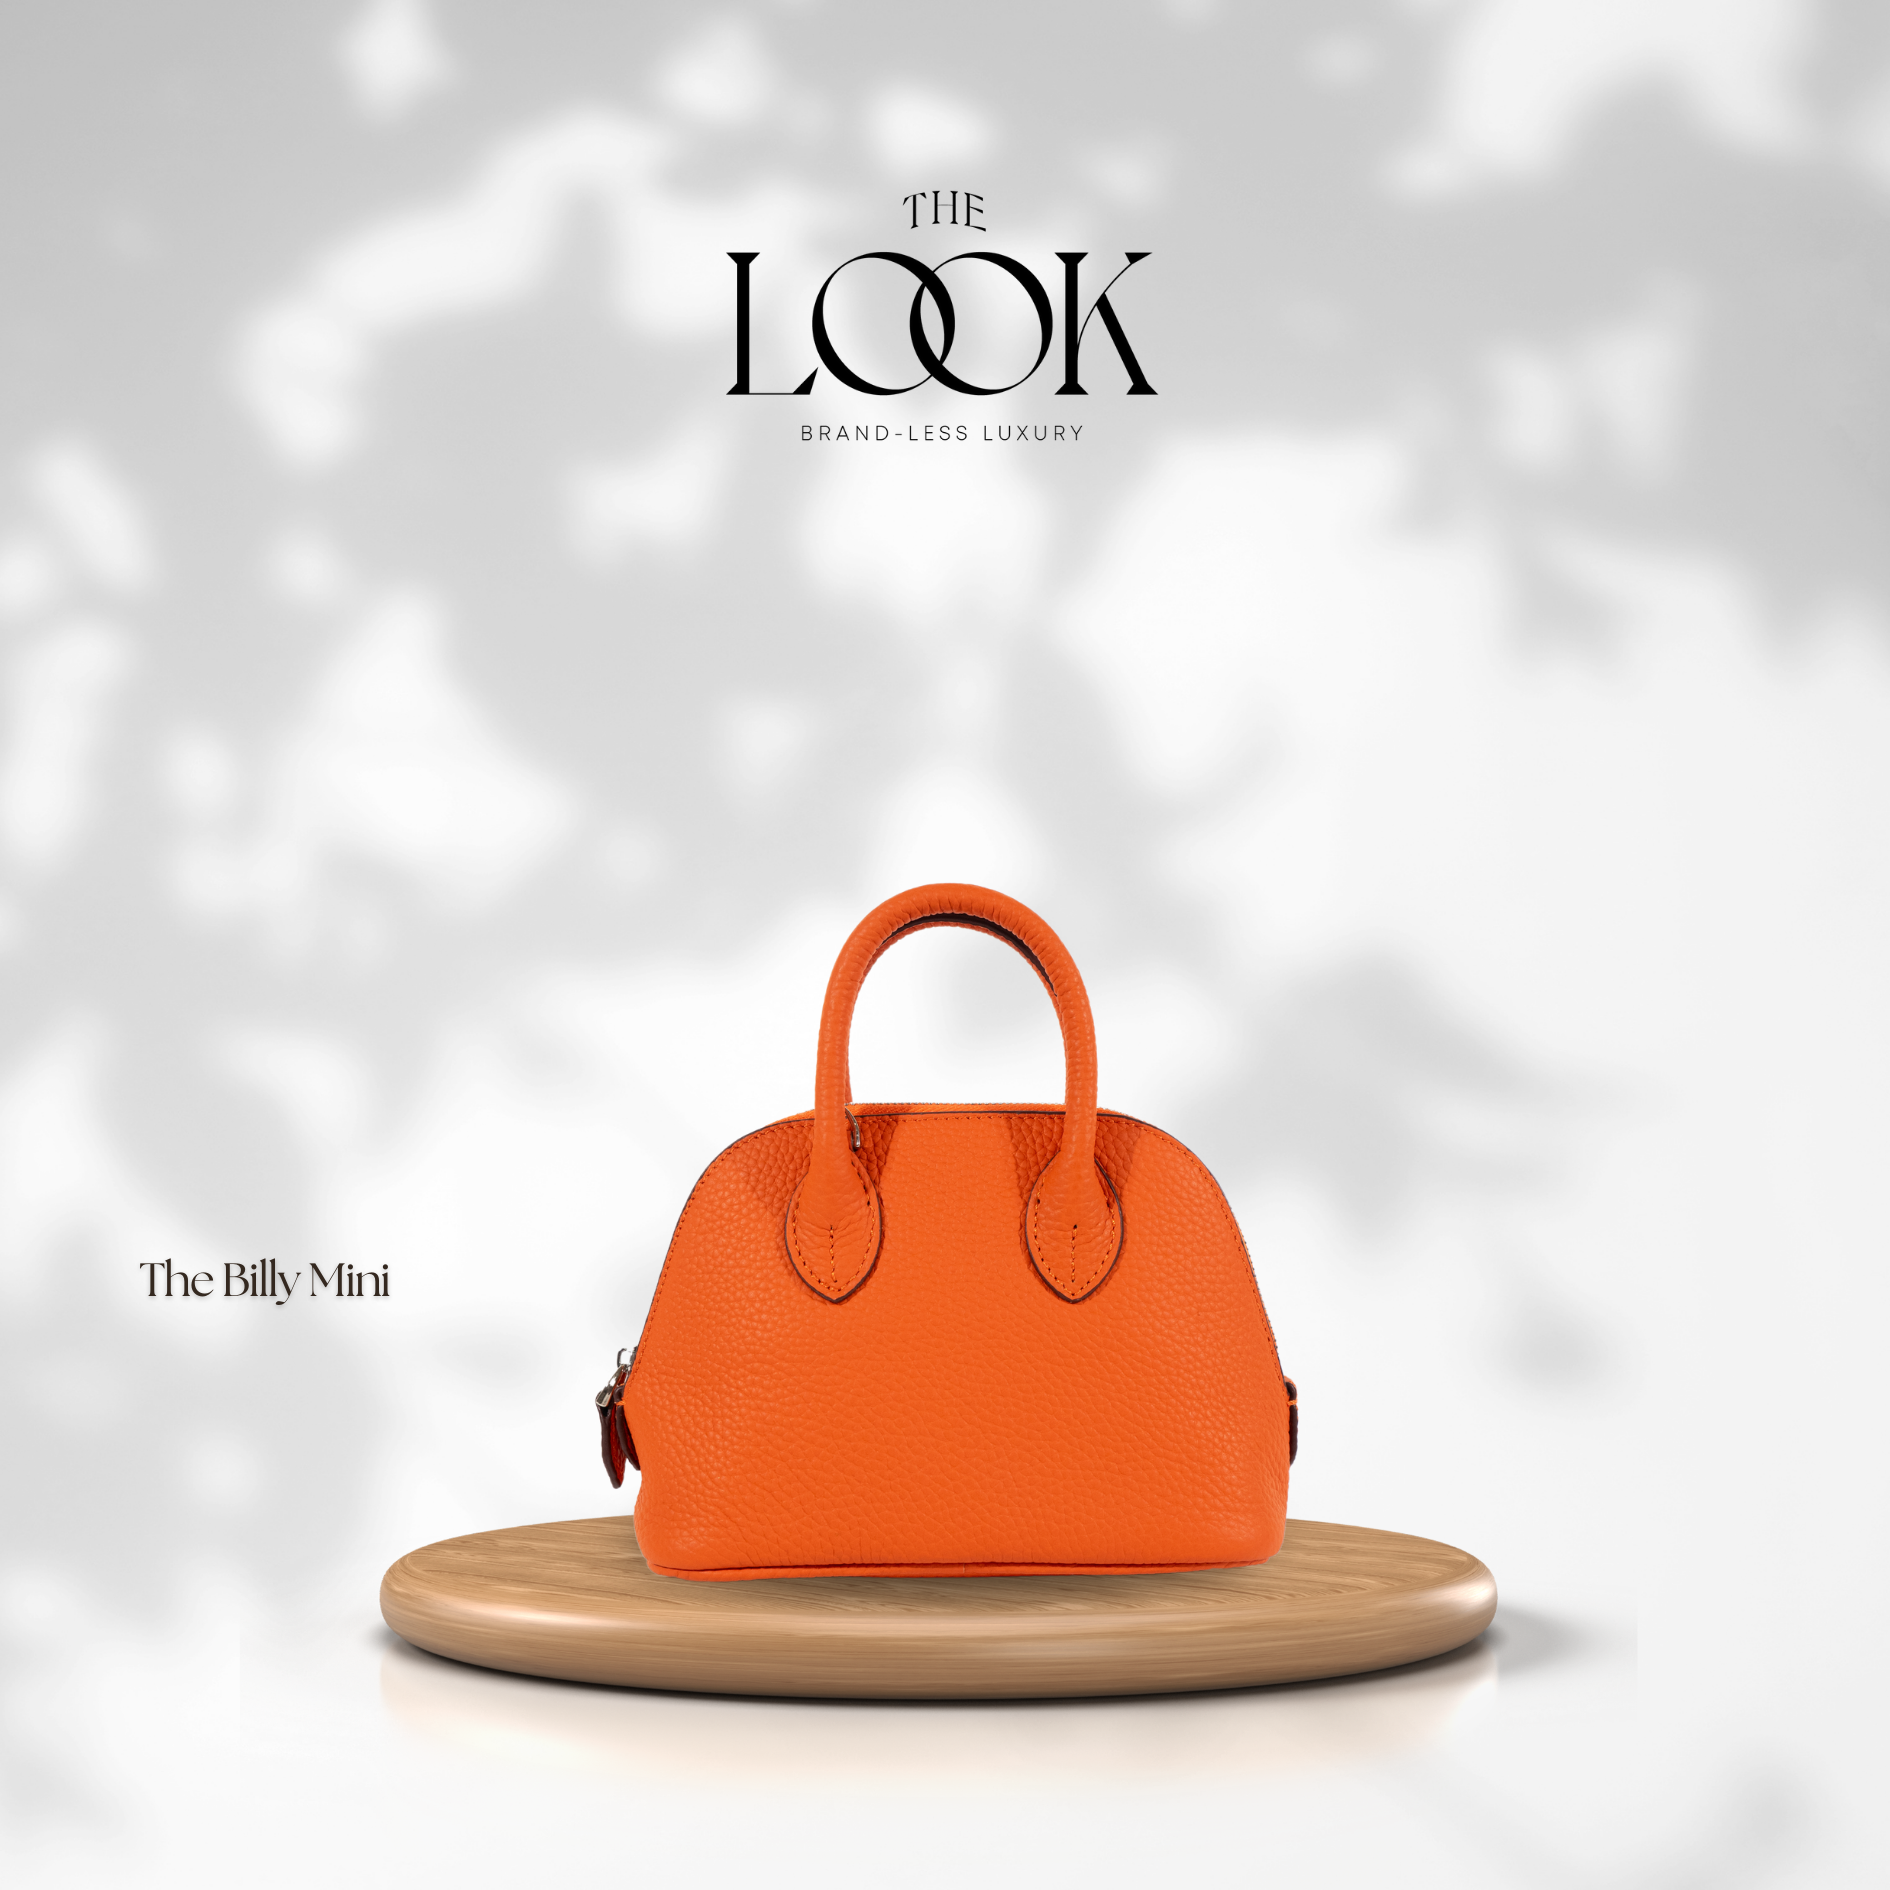 The Mini Billy Dome Crossbody in Tangerine by The Look